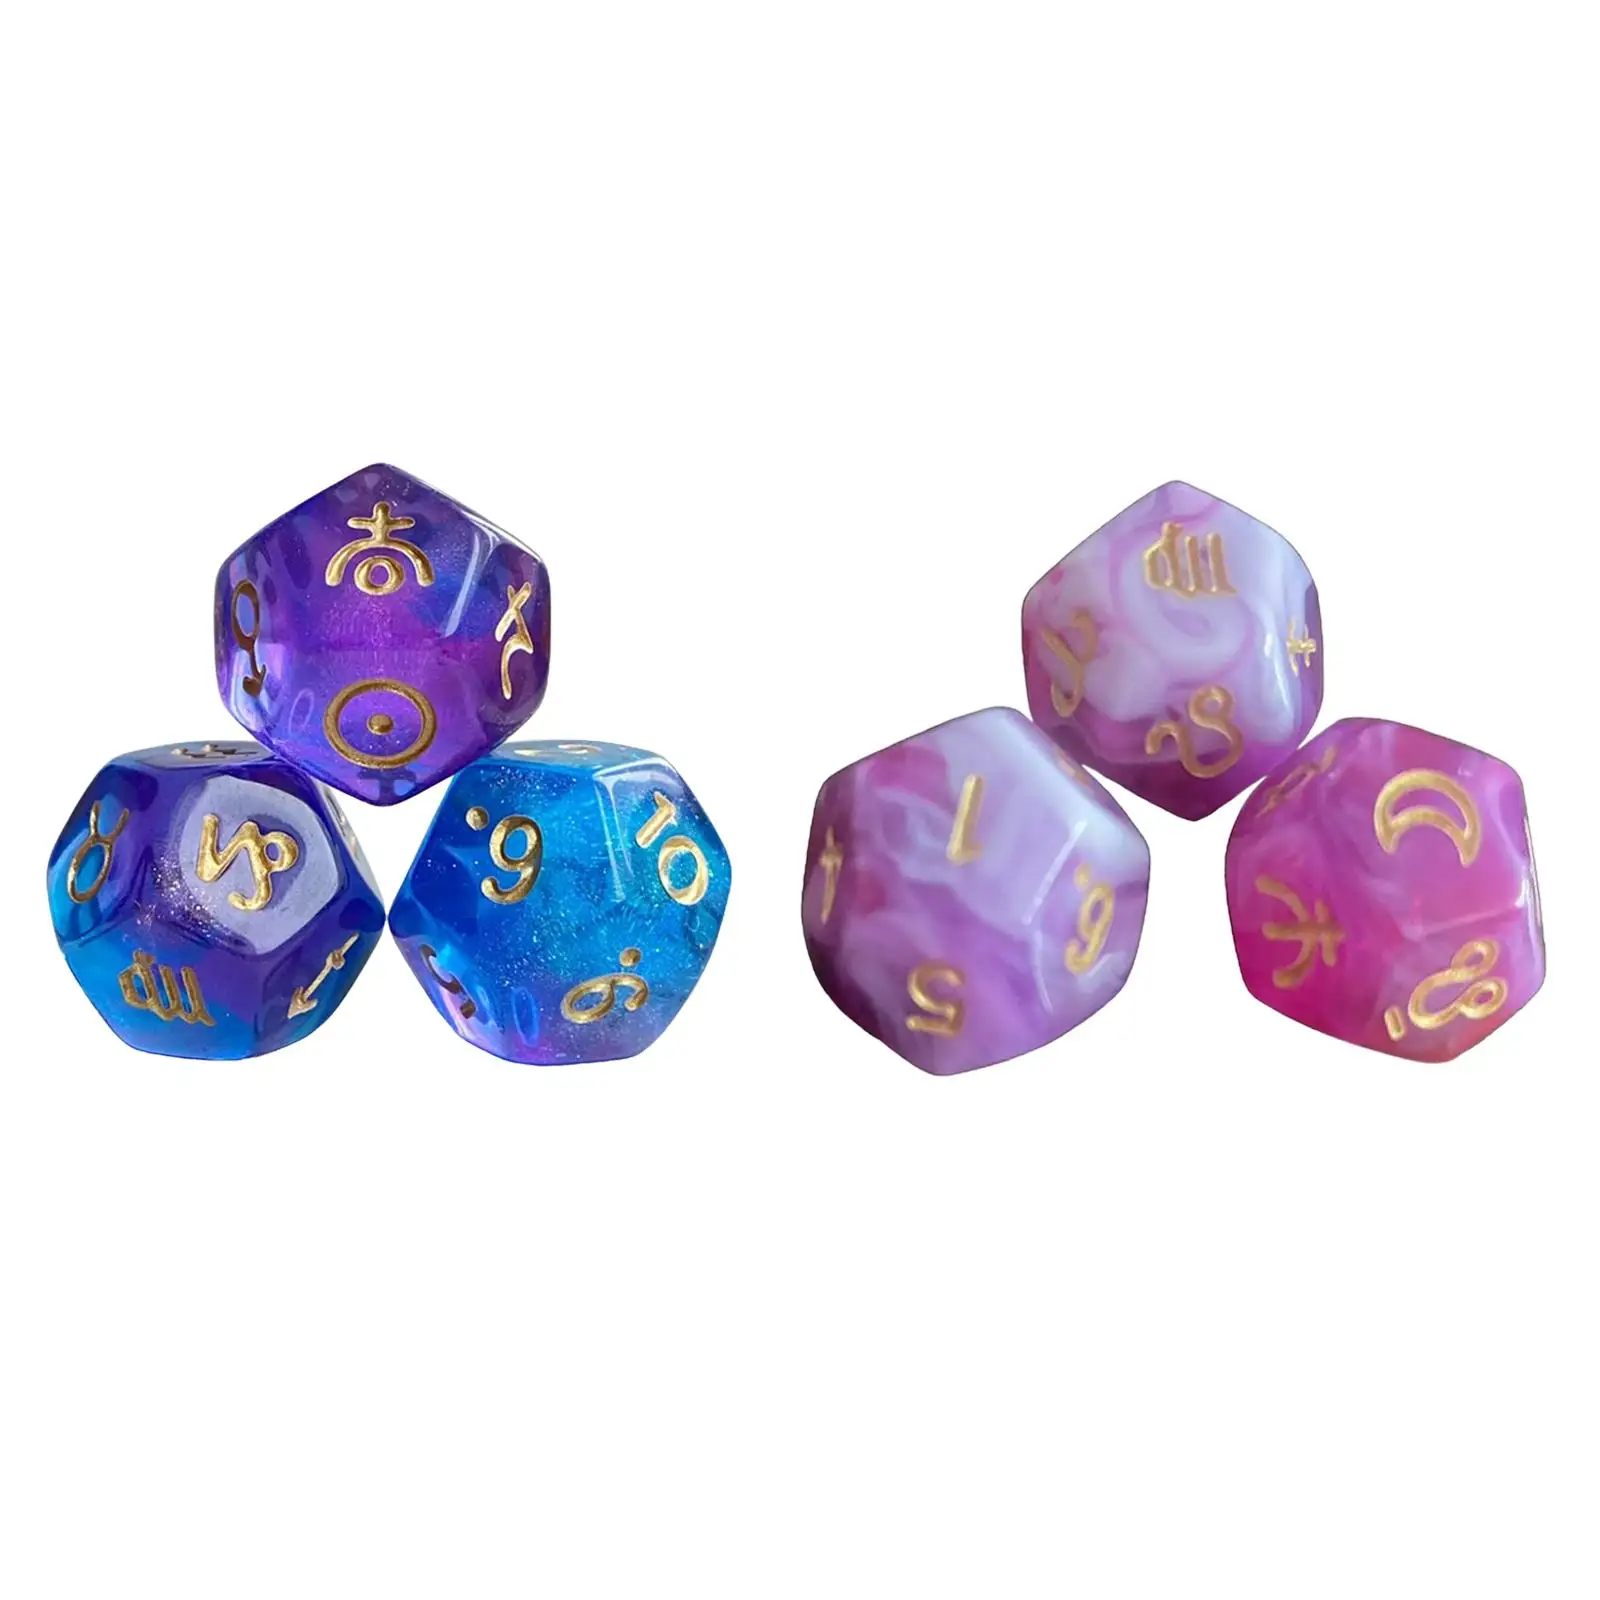 3x Astrology Signs Dice Easy to Read Multi Sided Dices Entertainment Toy Polyhedral Dice for Role Playing Game Teaching Prop